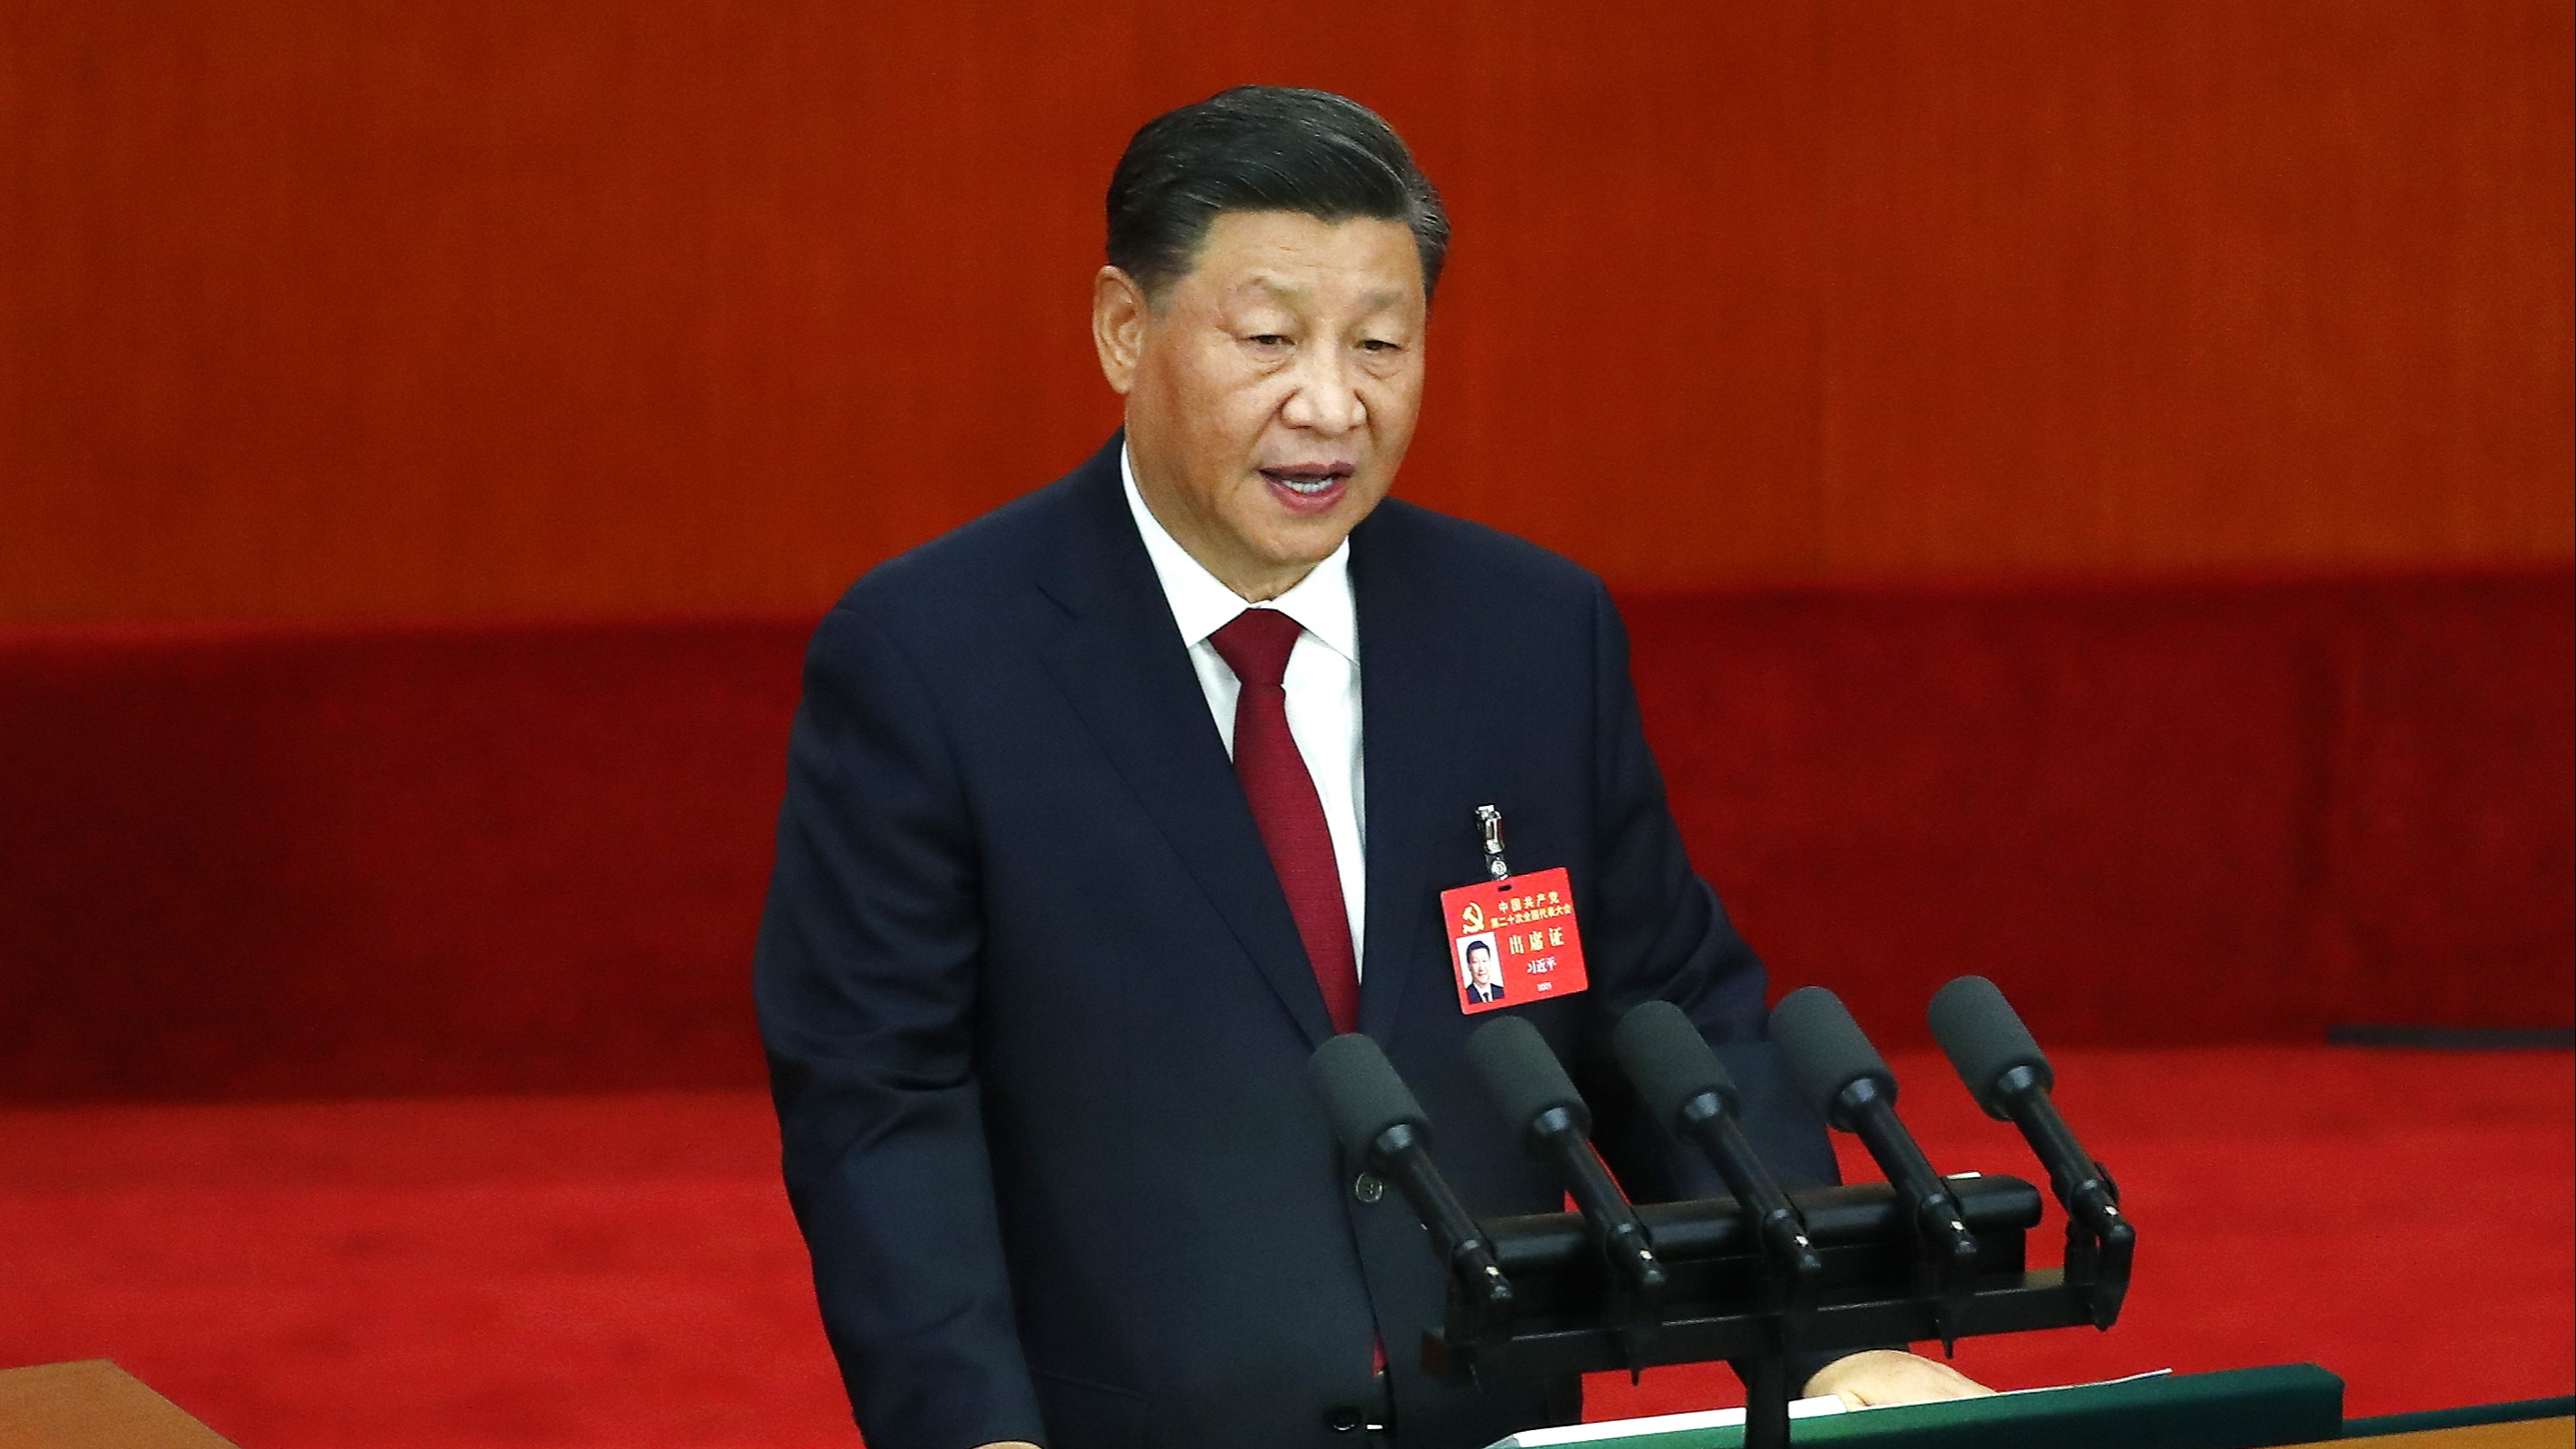 Xi Jinping heralds 'critical time' in history as he prepares for third term in power